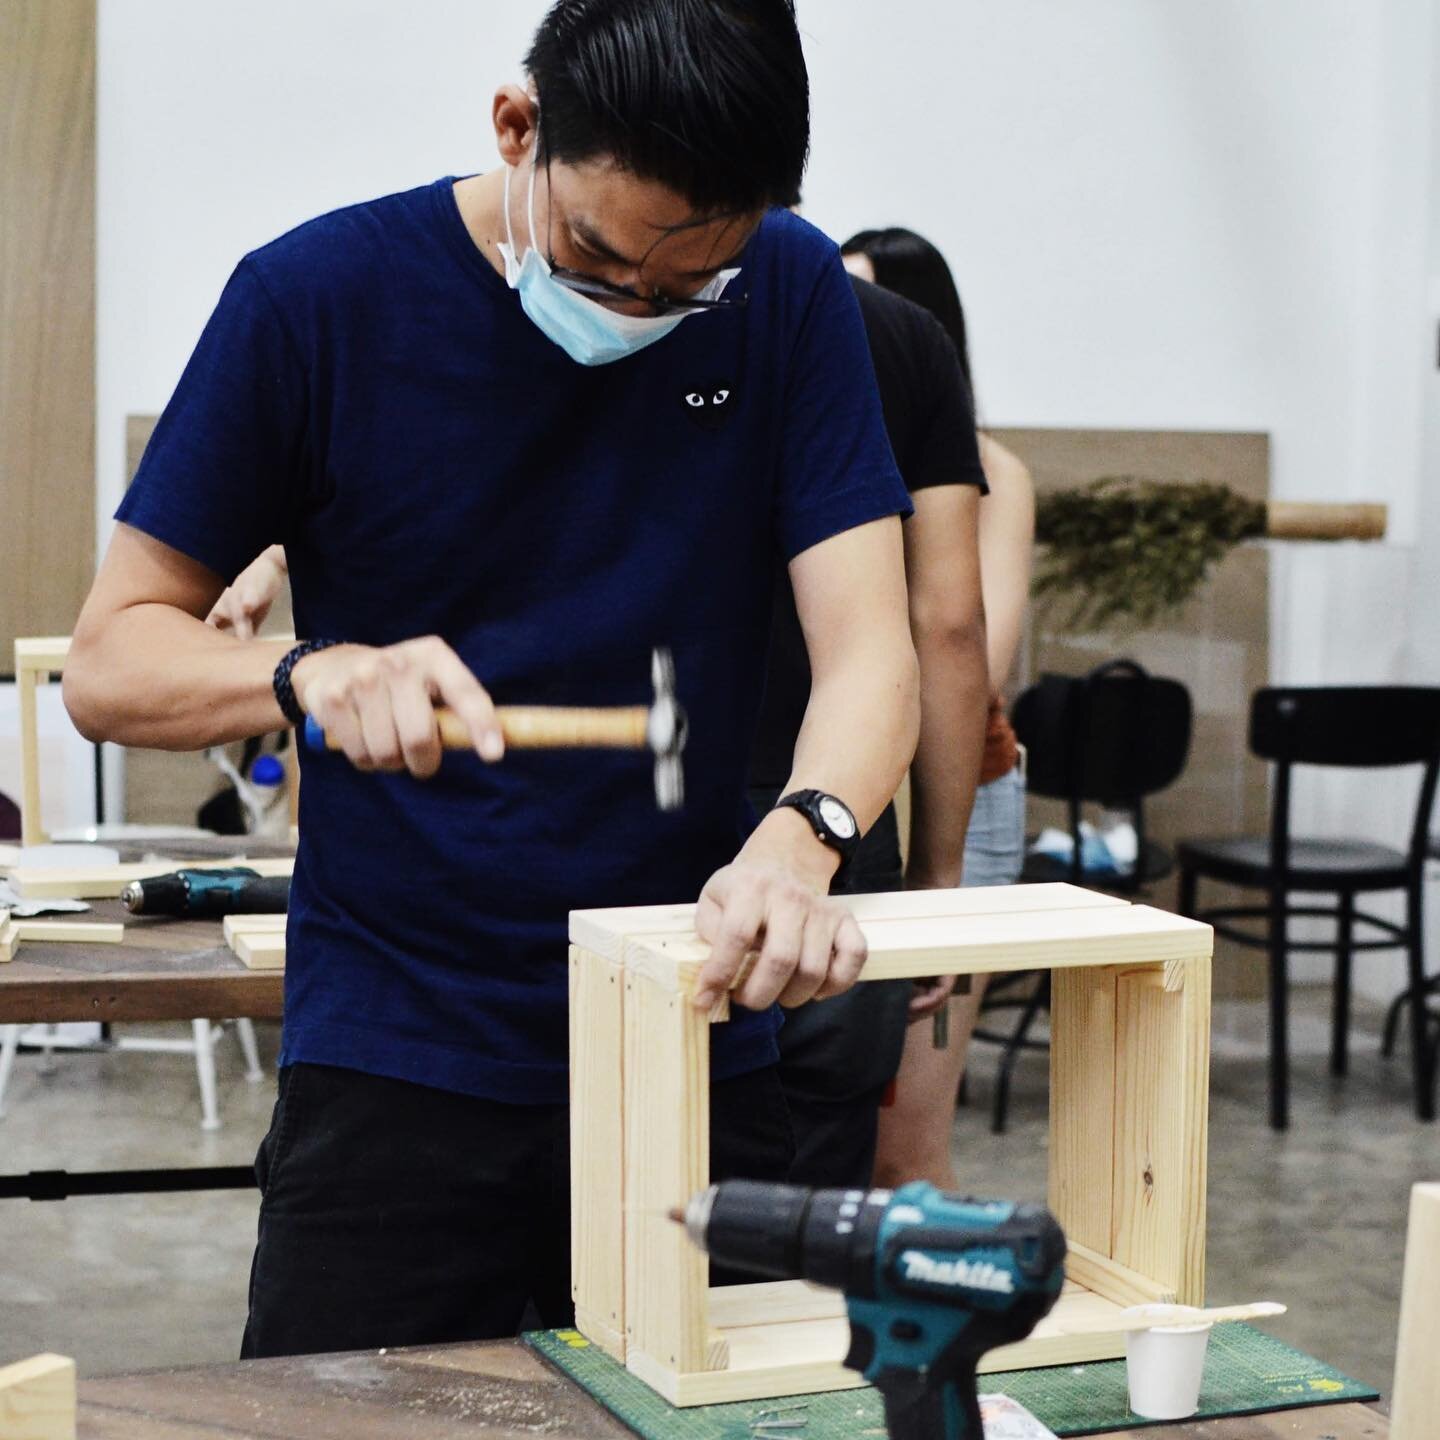 Basic Woodworking Workshop for Adults // Join us at our next session on 28 March 2021 Sunday 2.30-5.30pm. Enjoy $30 off when you sign up with a friend! #thecommonbench #sgworkshop #sglearn #sgworkshops #sgexpats #sgig